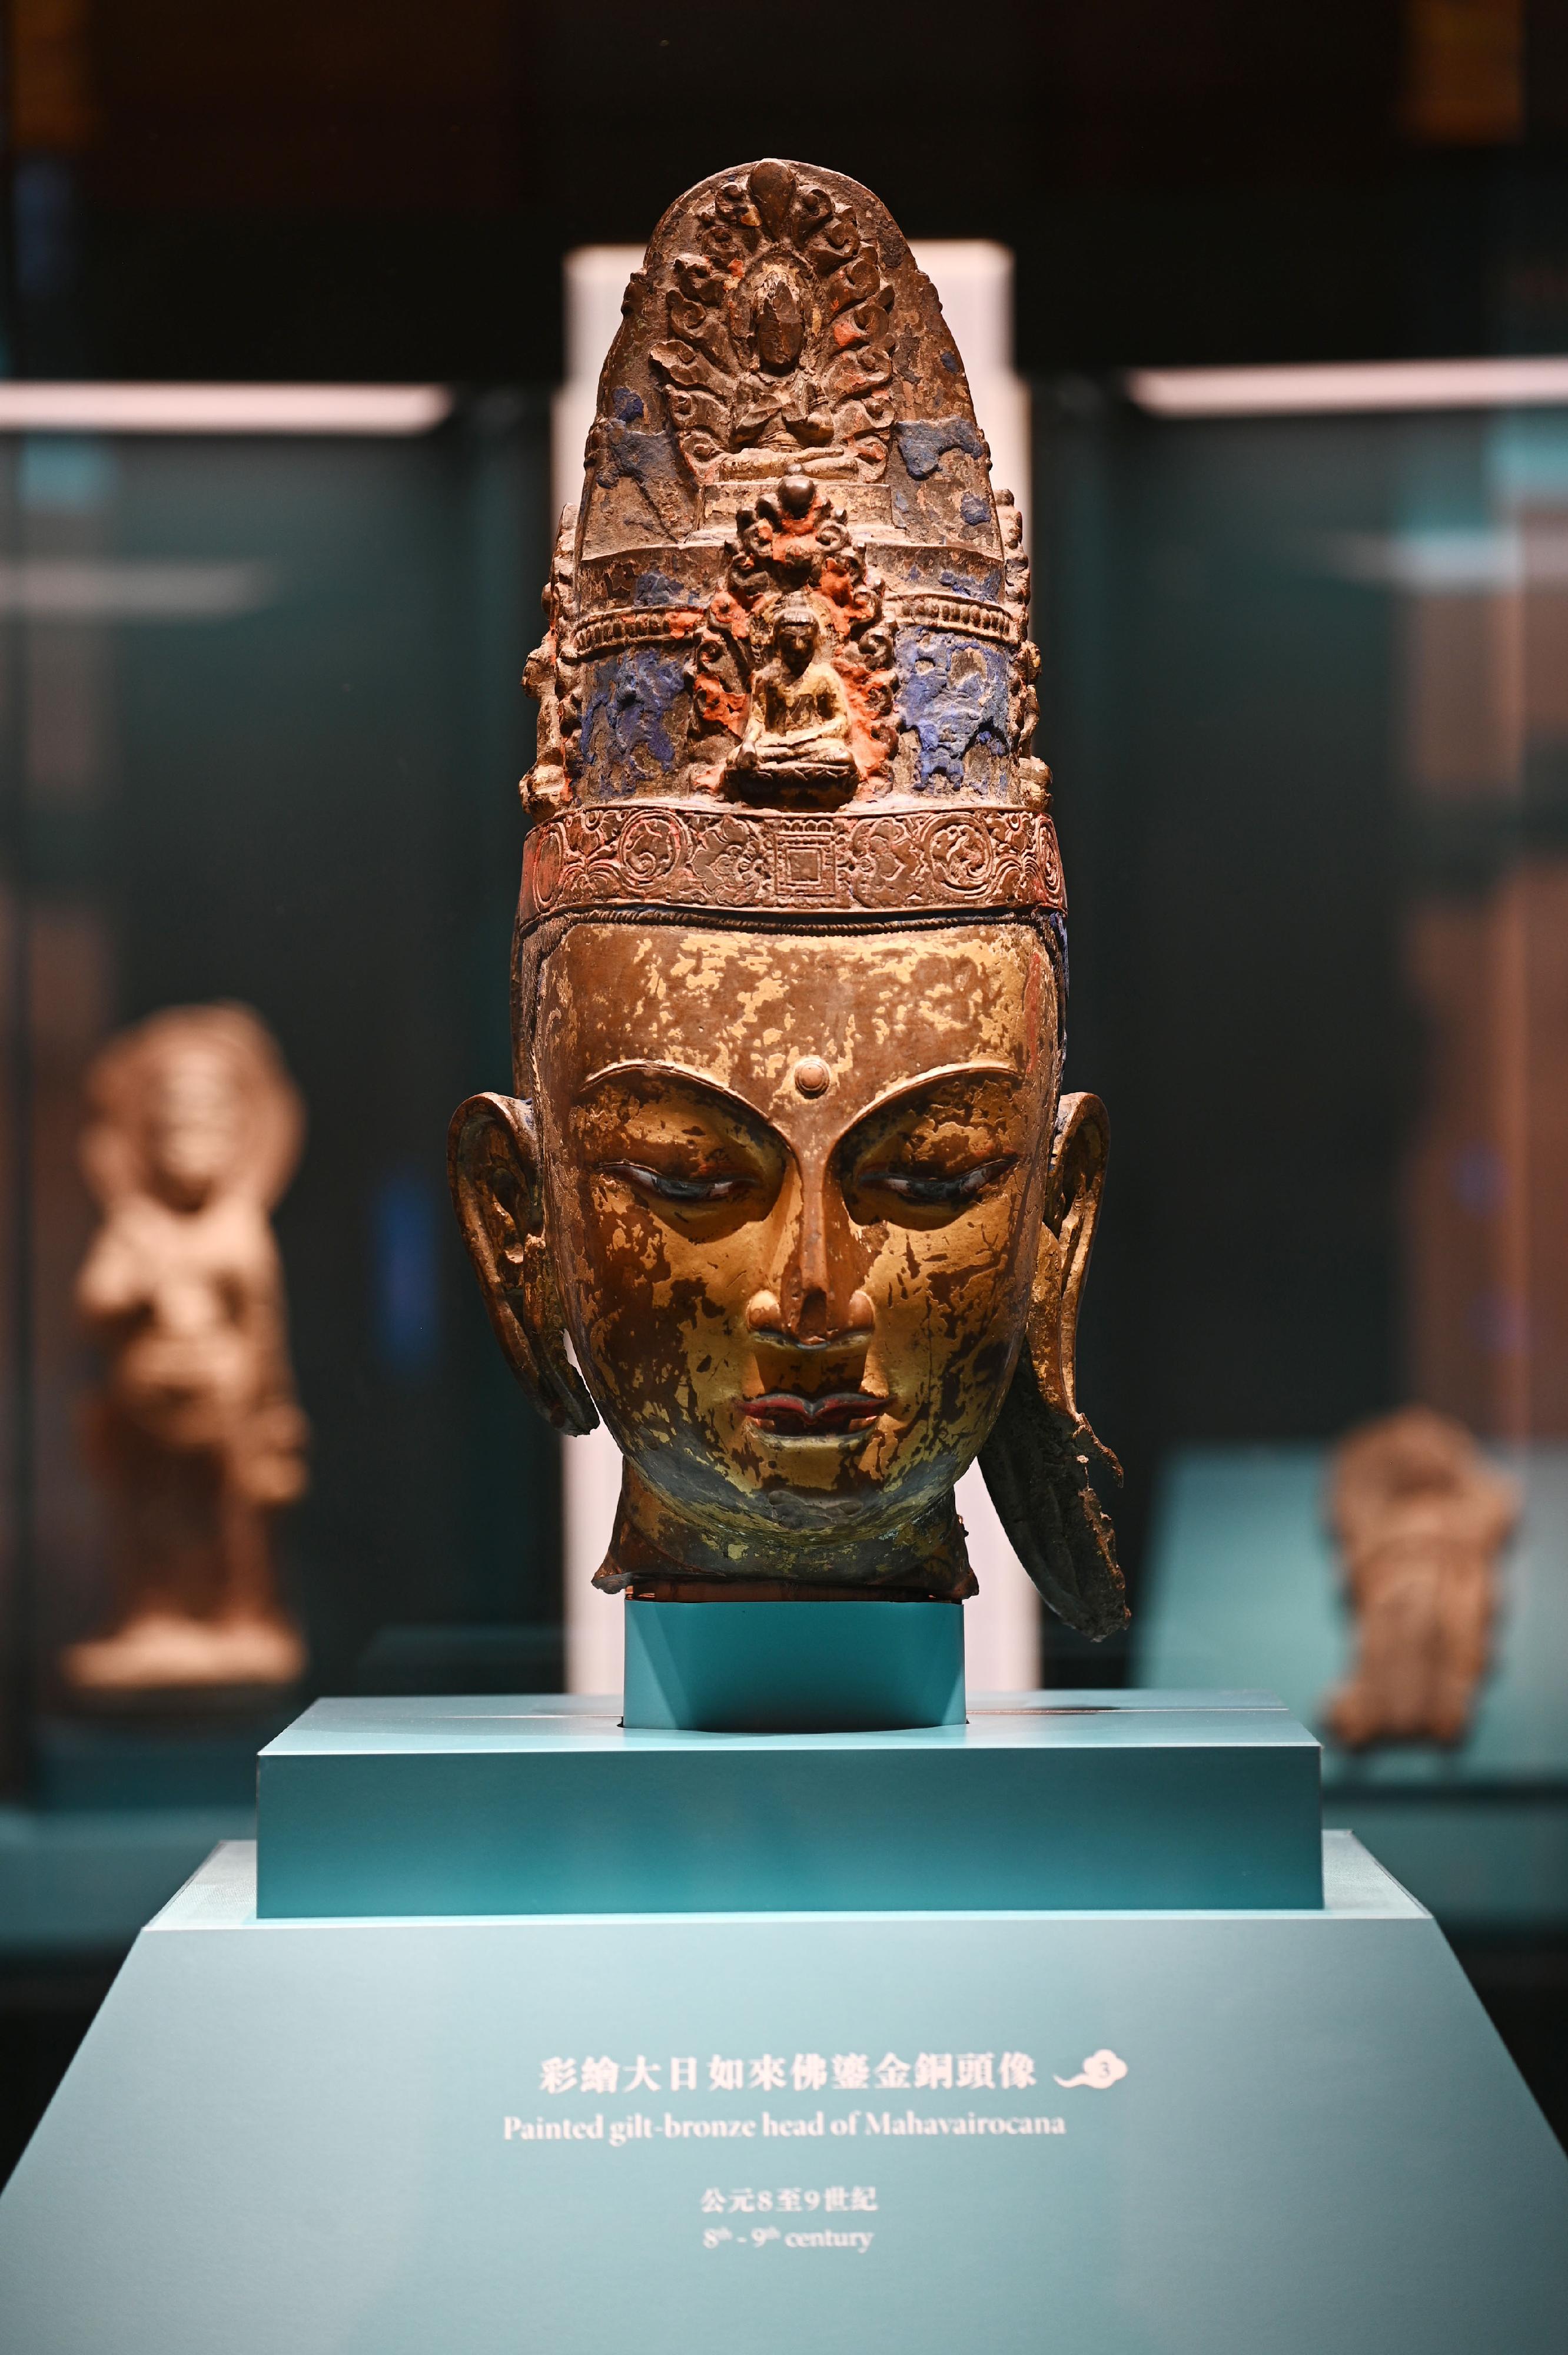 The opening ceremony for the exhibition "The Hong Kong Jockey Club Series: Dunhuang: Enchanting Tales for Millennium" was held today (August 23) at the Hong Kong Heritage Museum. Picture shows a painted gilt-bronze head of Mahavairocana.

